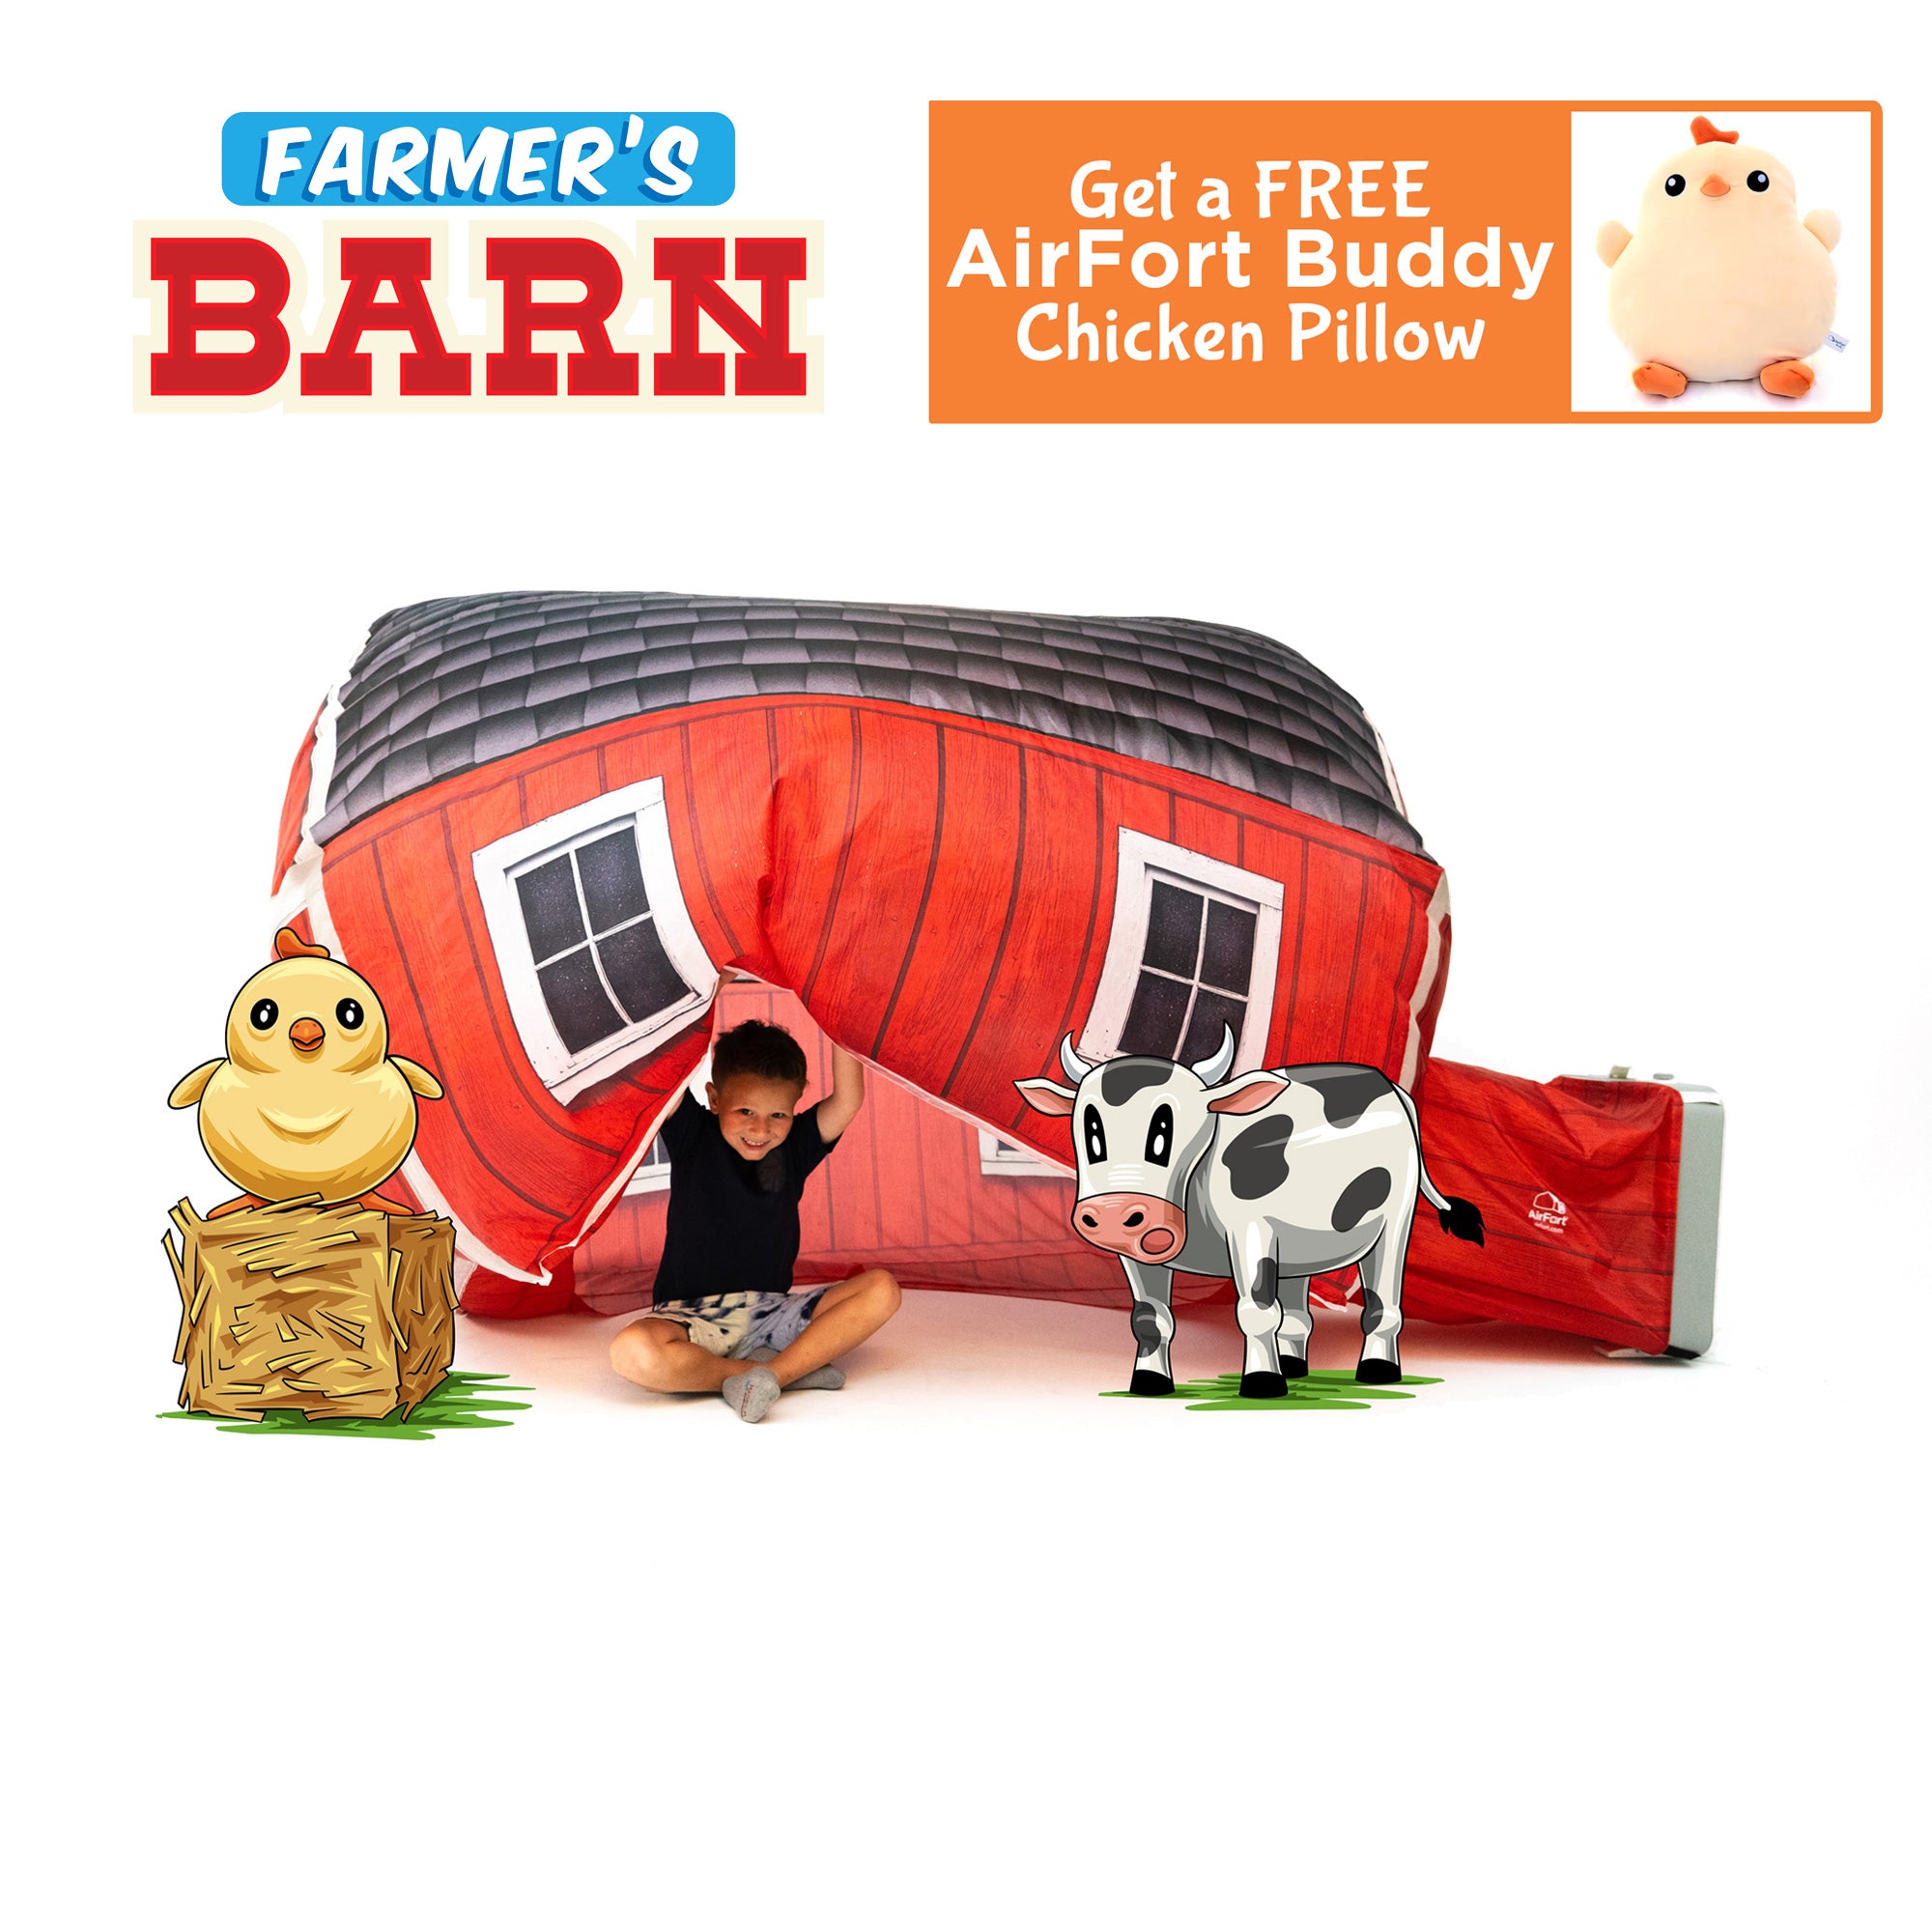 Farmers Barn + FREE AirFort Buddy Chicken Pillow (While Supplies Last!)